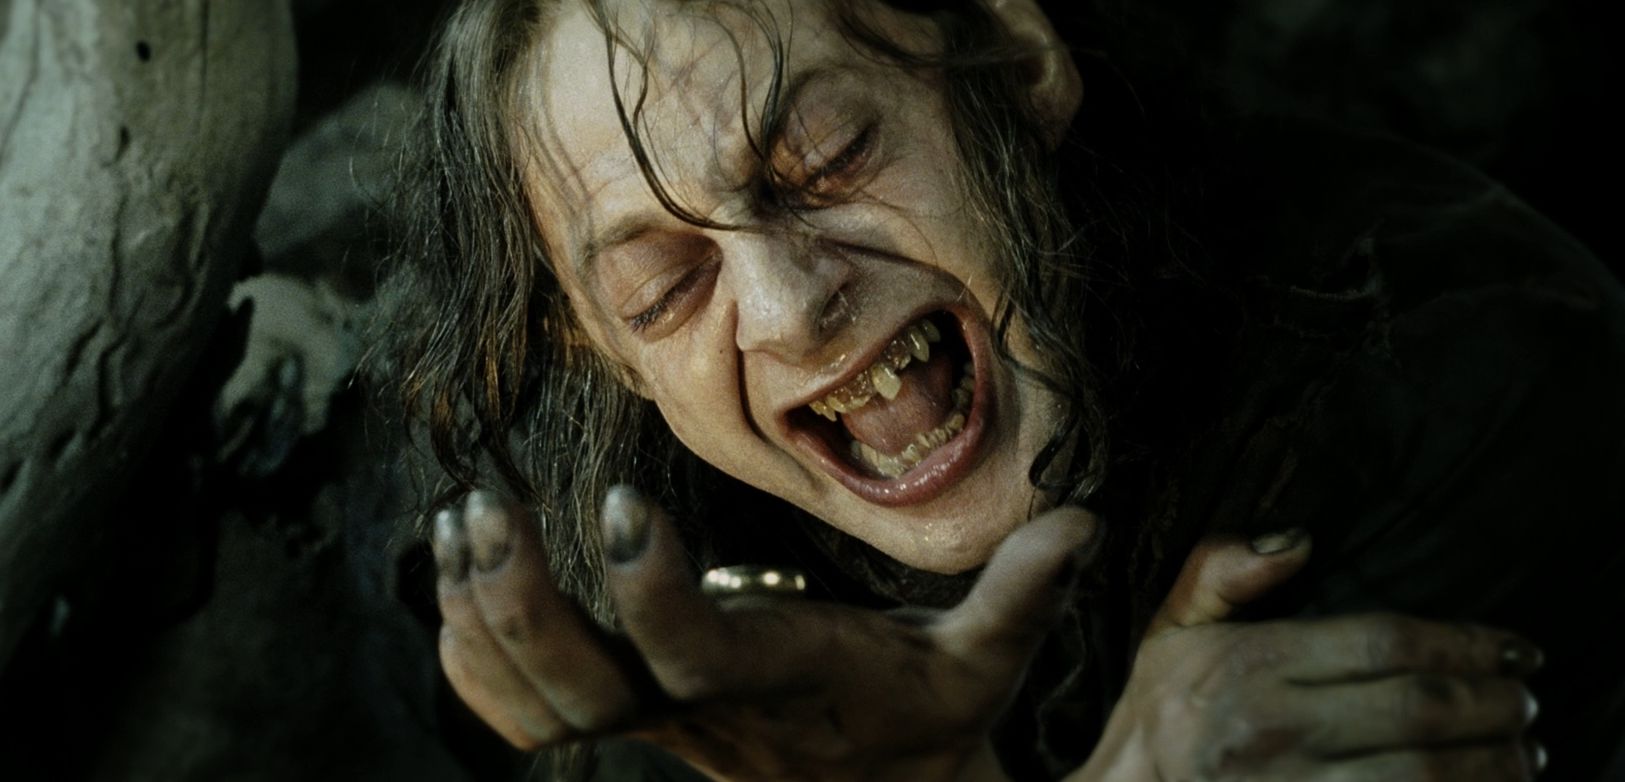 Nasty young gollum in Return of the King